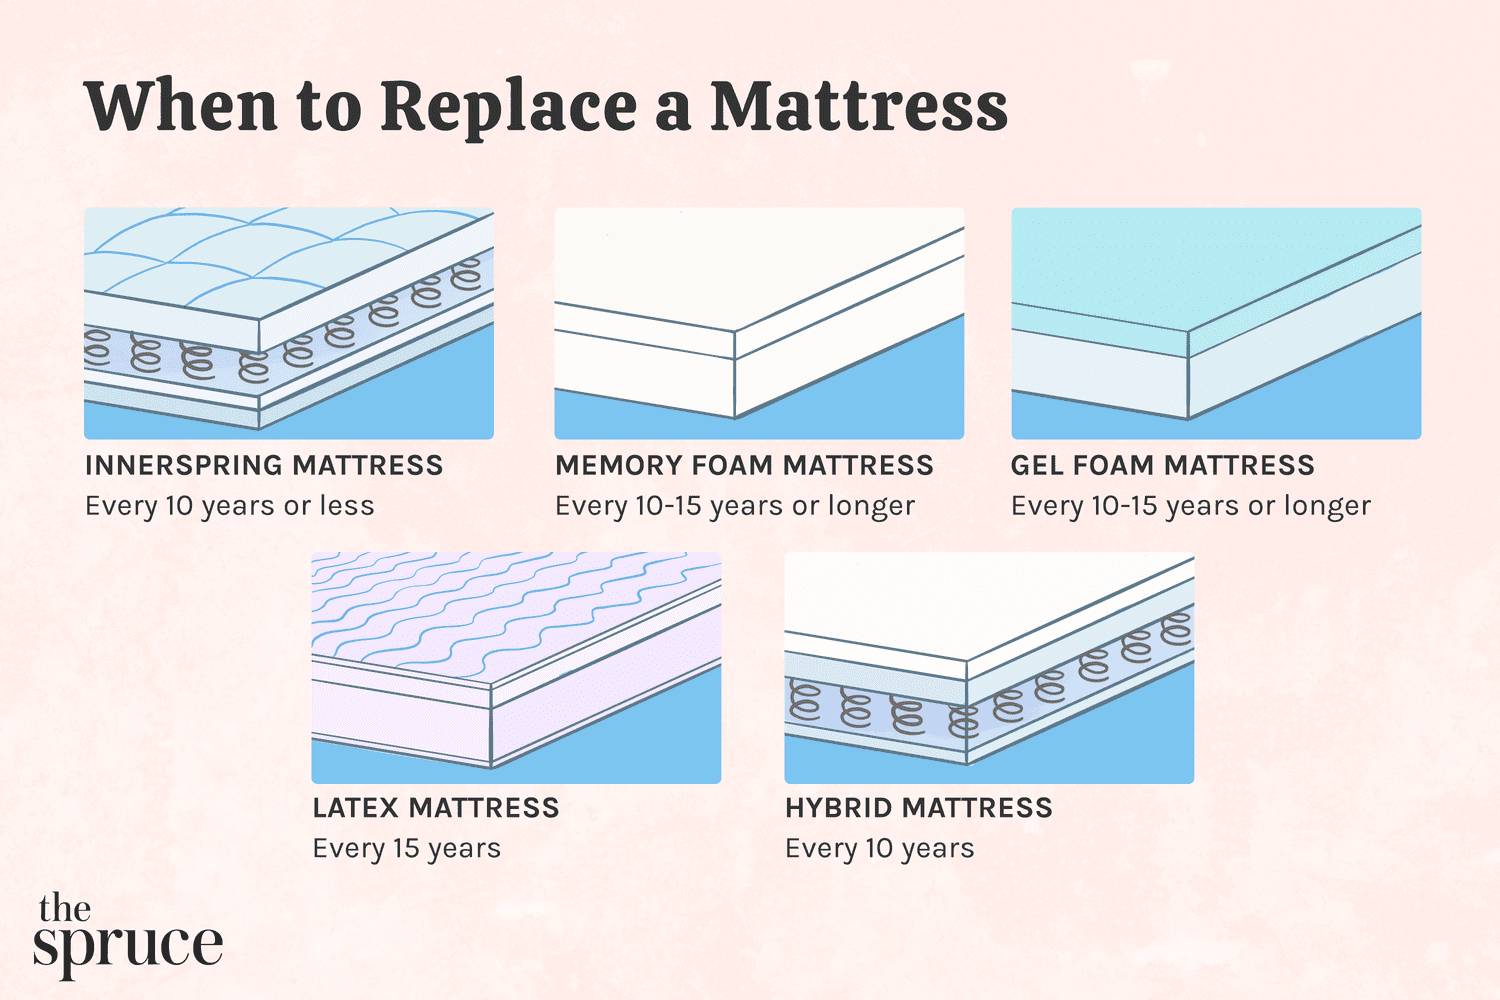 When to Replace a Mattress